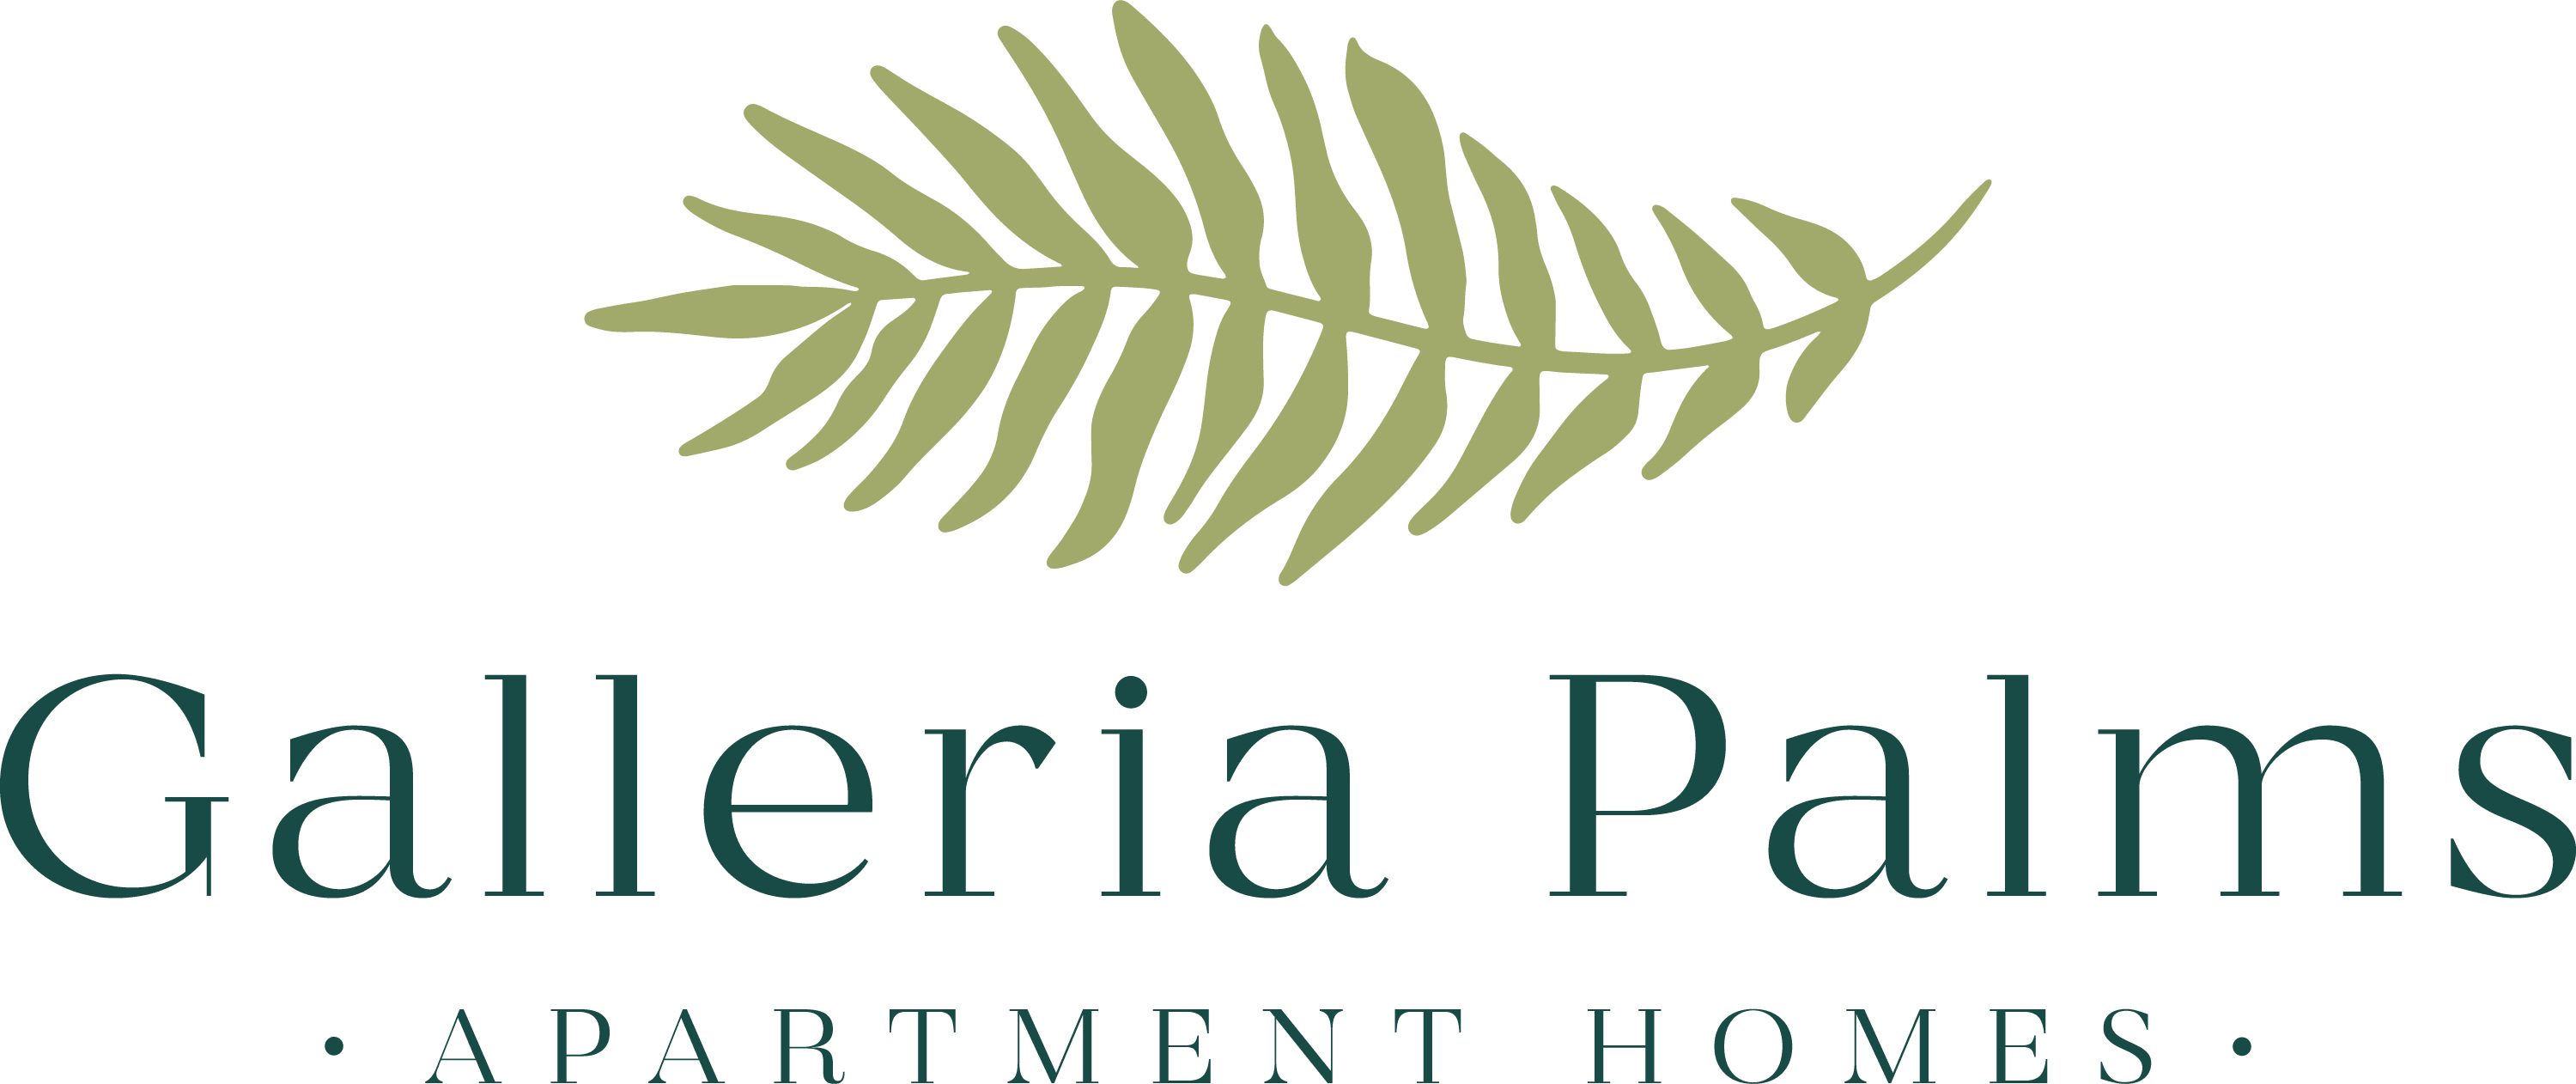 Galleria Palms Apartments - Apartments in Henderson, NV